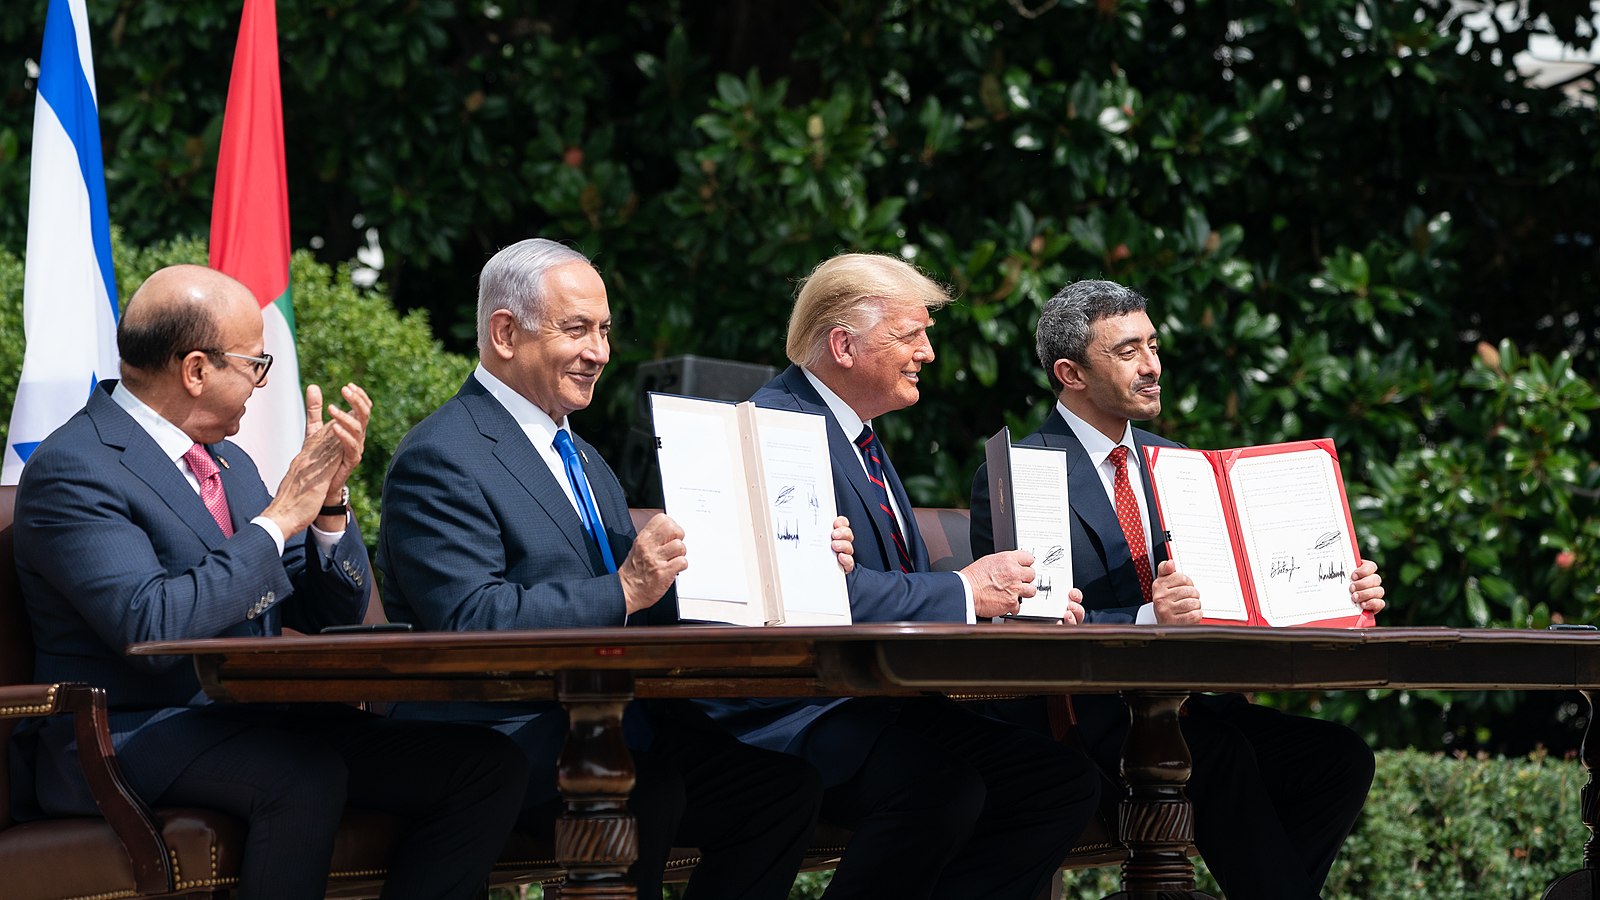 The “Peace Agreement” That Israel Just Signed Is Another Huge Step Toward A Palestinian State